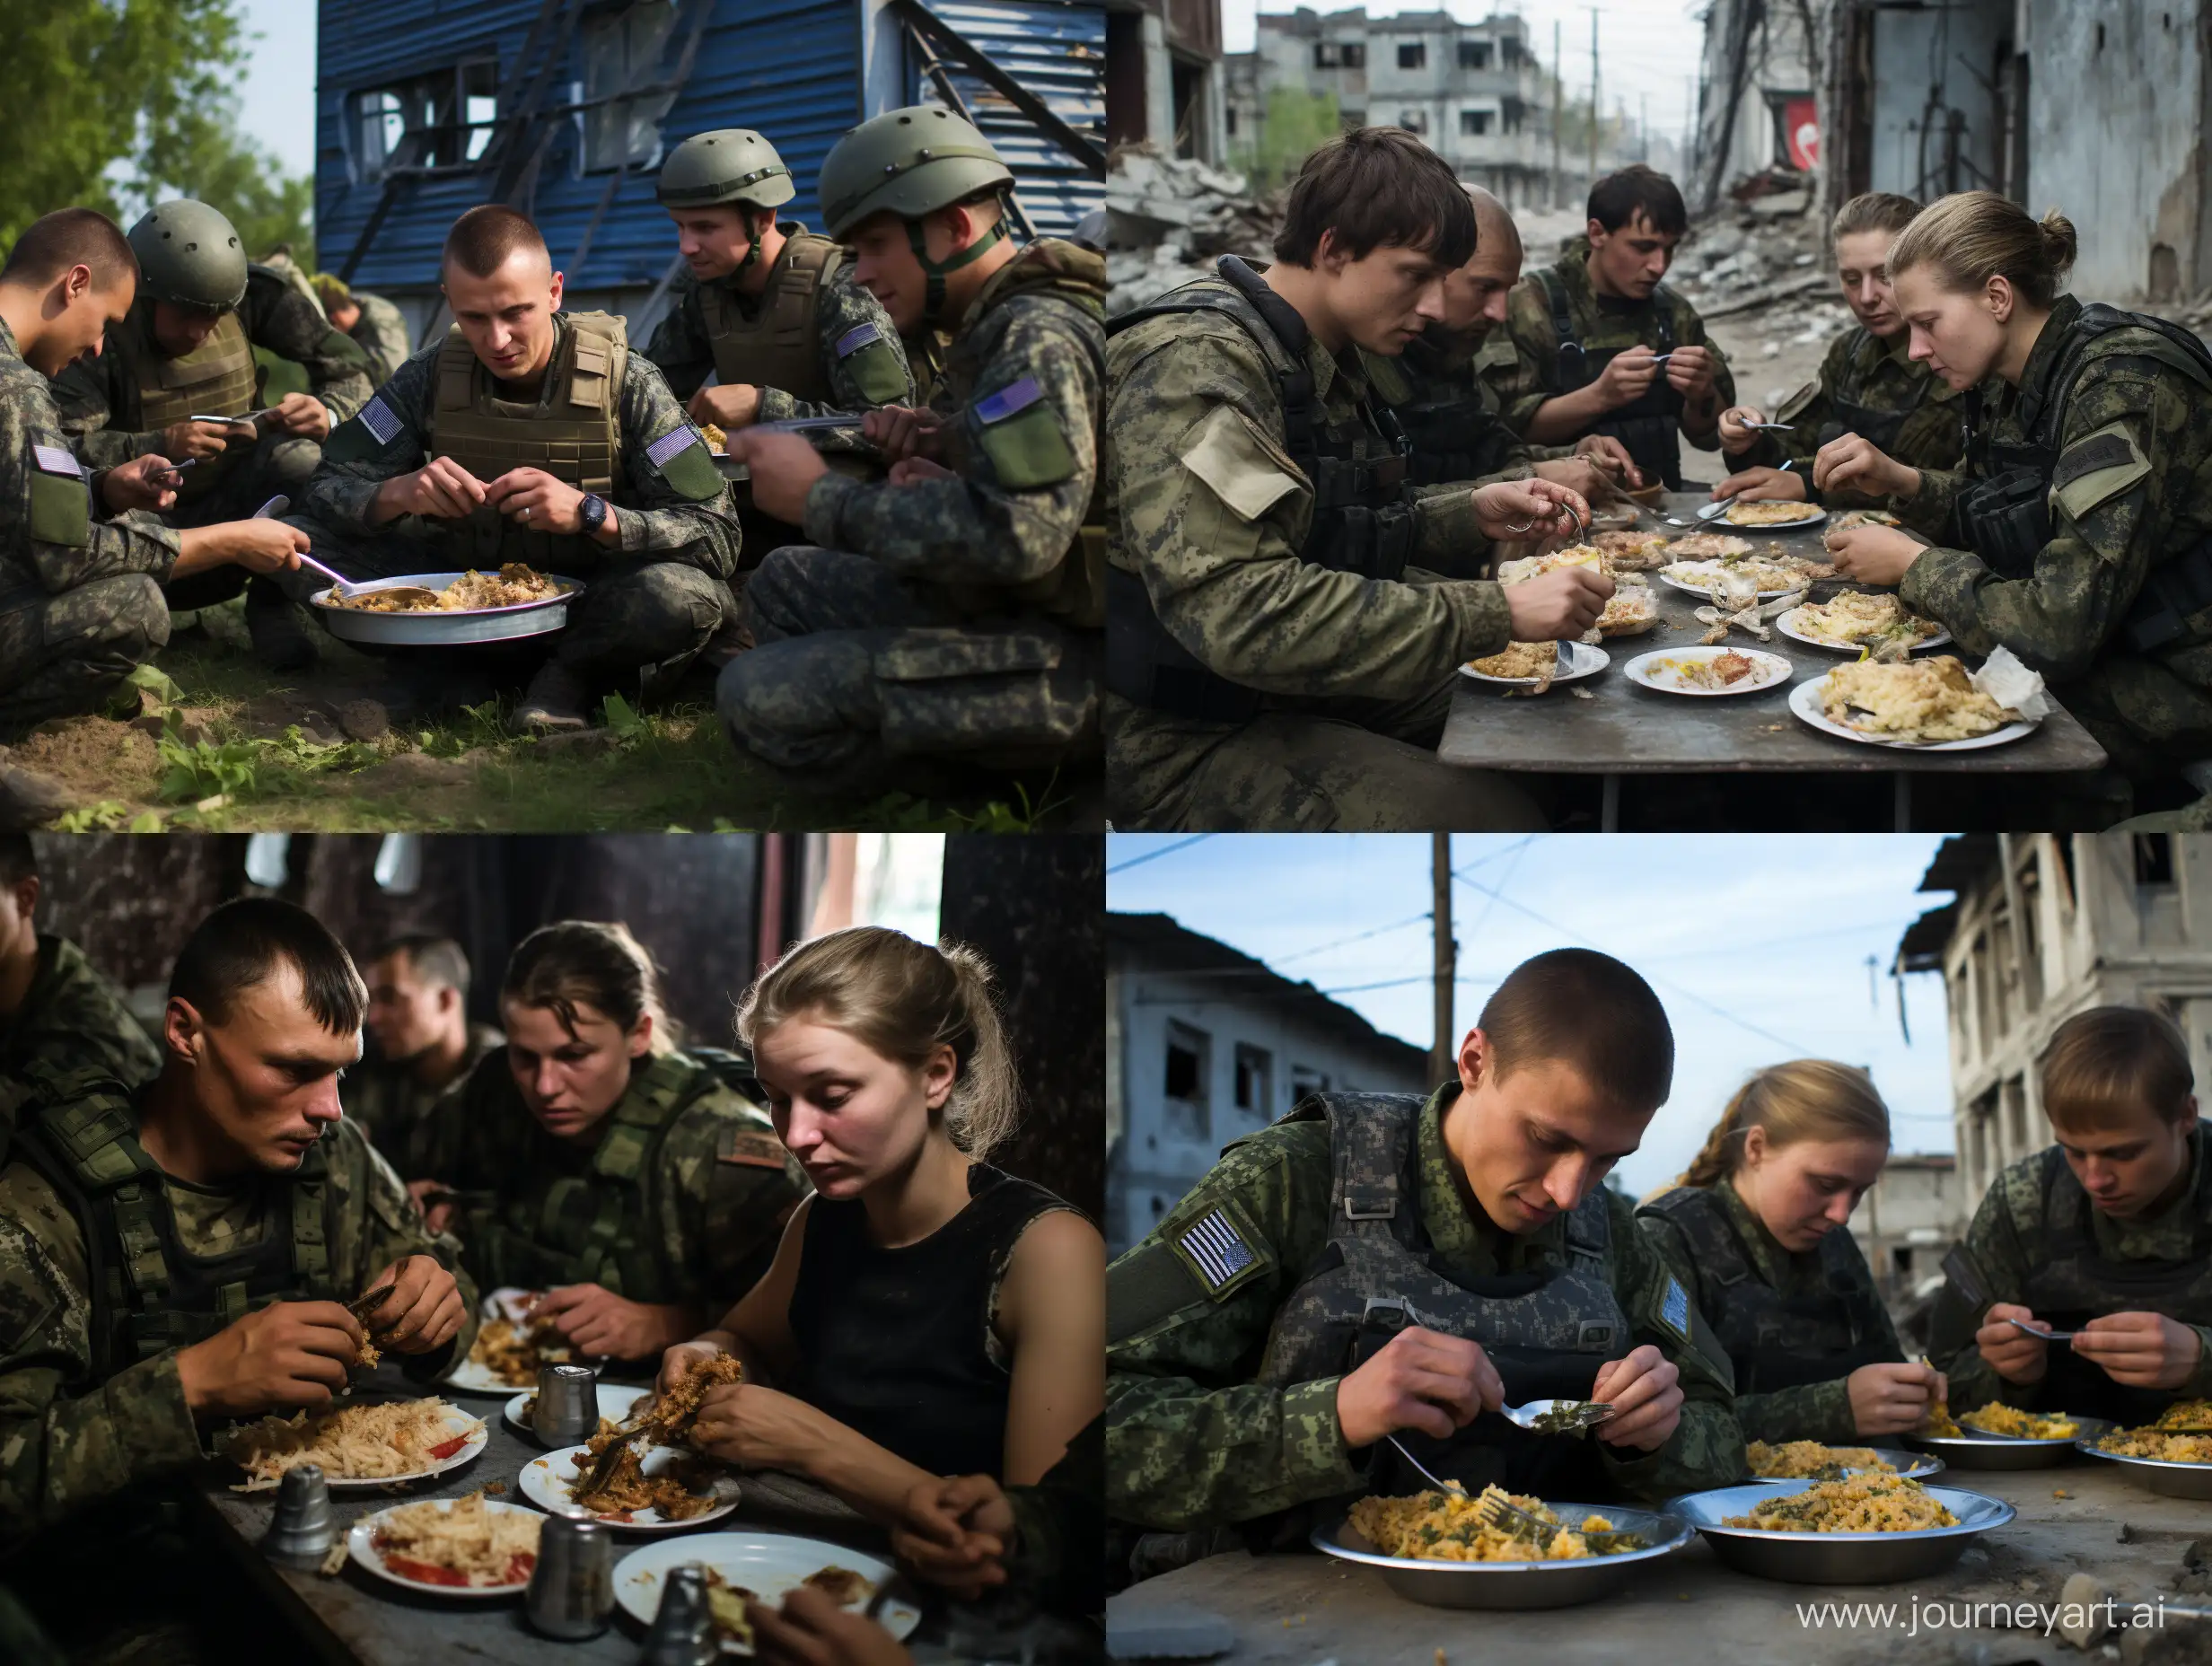 Ukrainian-Soldiers-Sharing-a-Meal-Amidst-Battle-in-Philippines-City